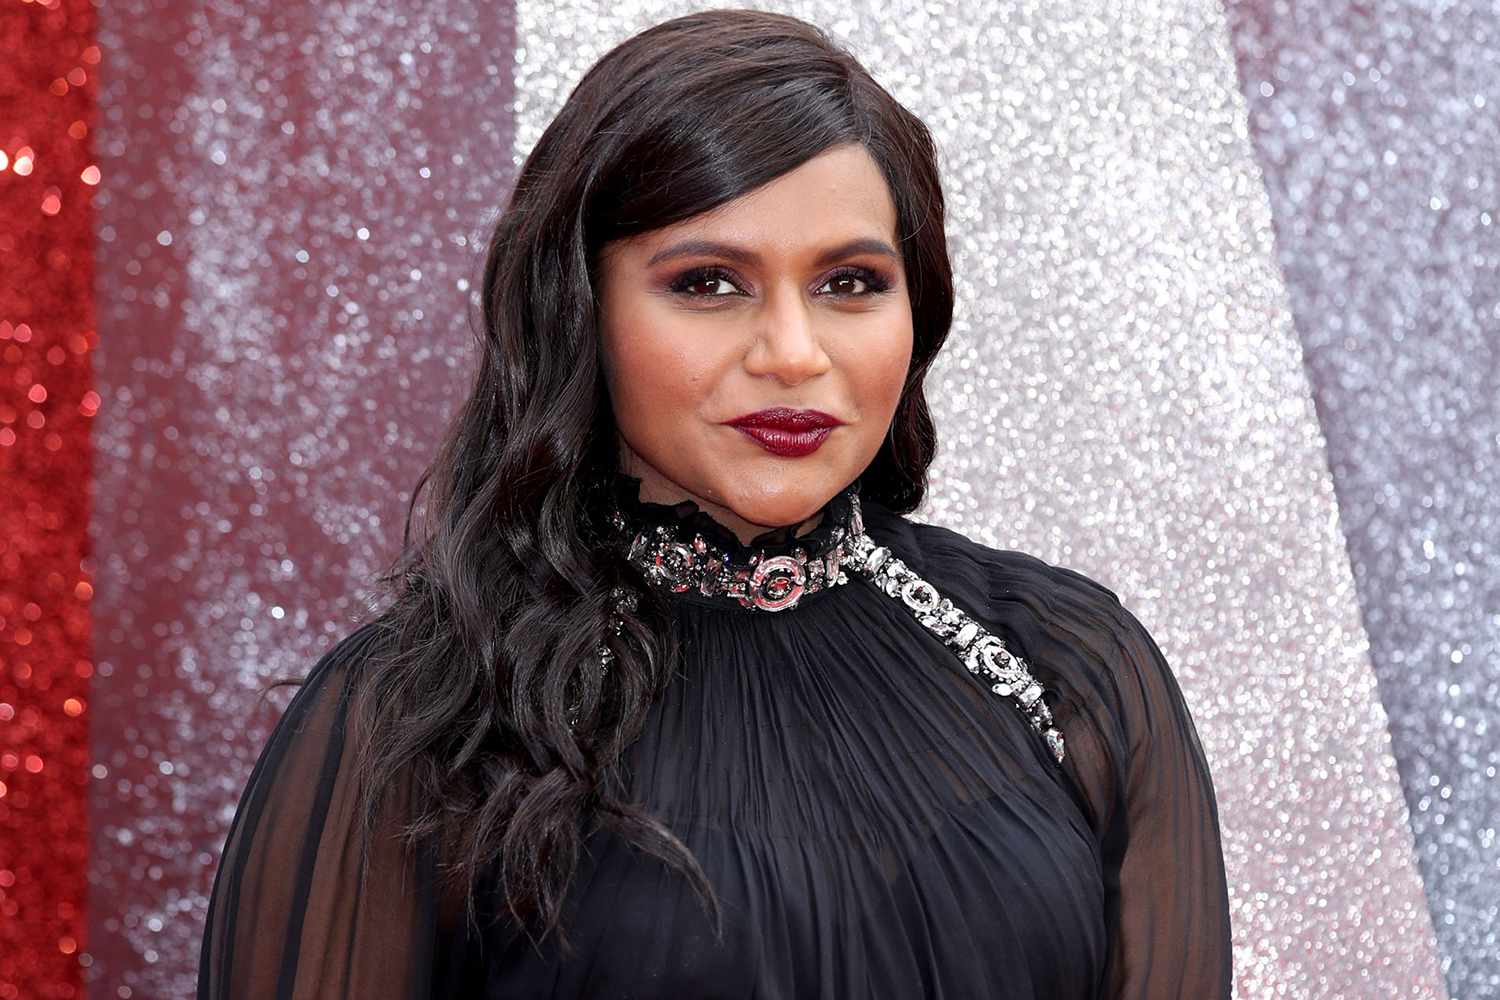 Mindy Kaling's Pretty Summer Dress Featured This One Detail That's So Popular Right Now